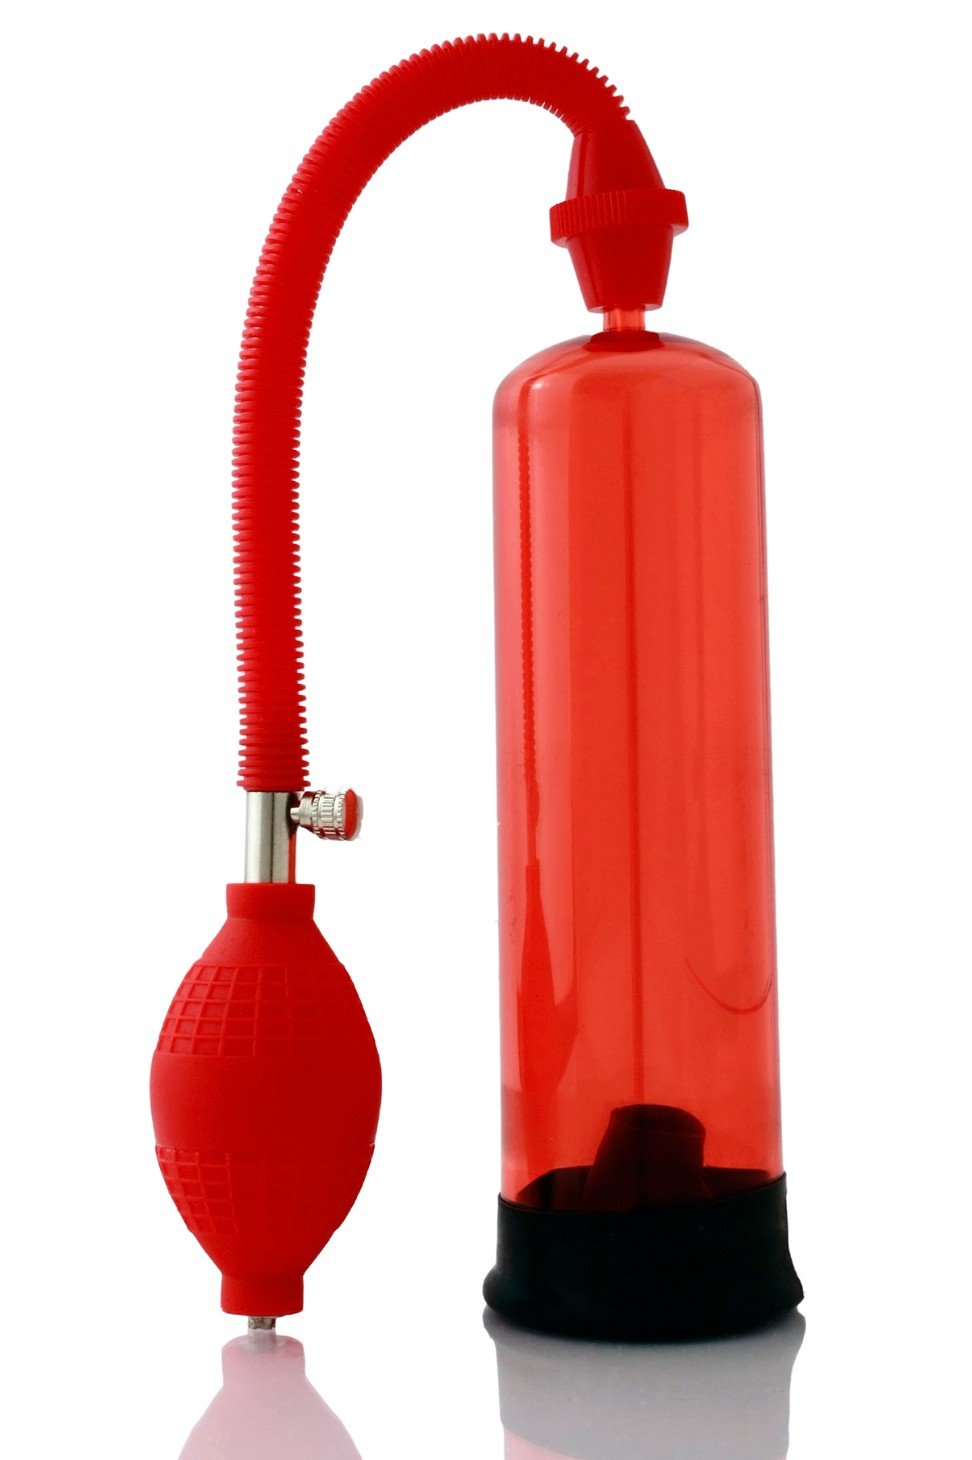 Penis pumps are used to help with erectile dysfunction. Photo: Alamy